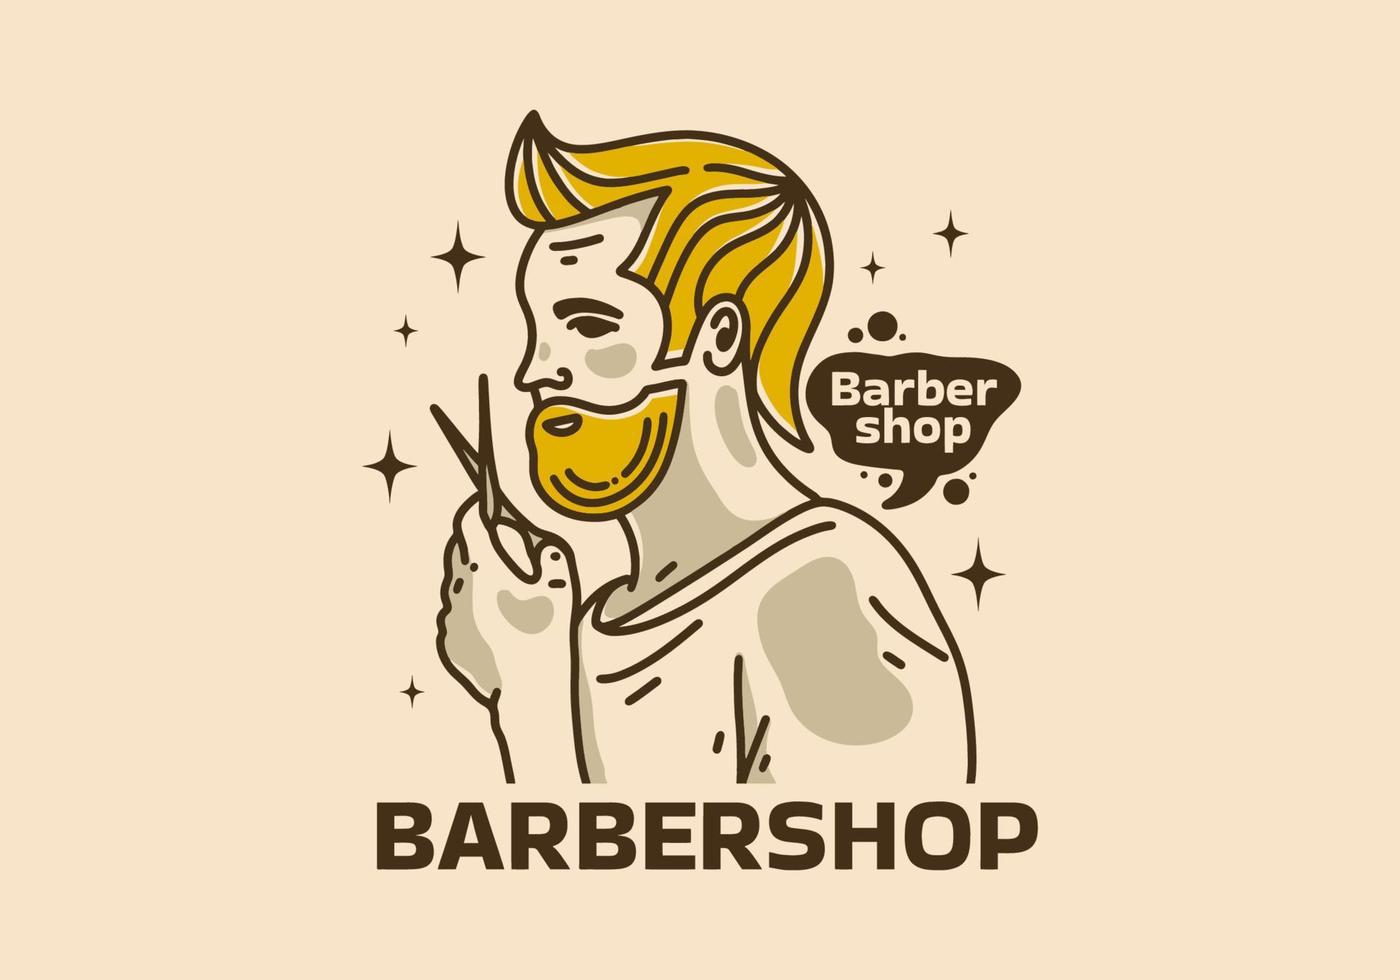 Vintage art illustration of a man and a haircut vector